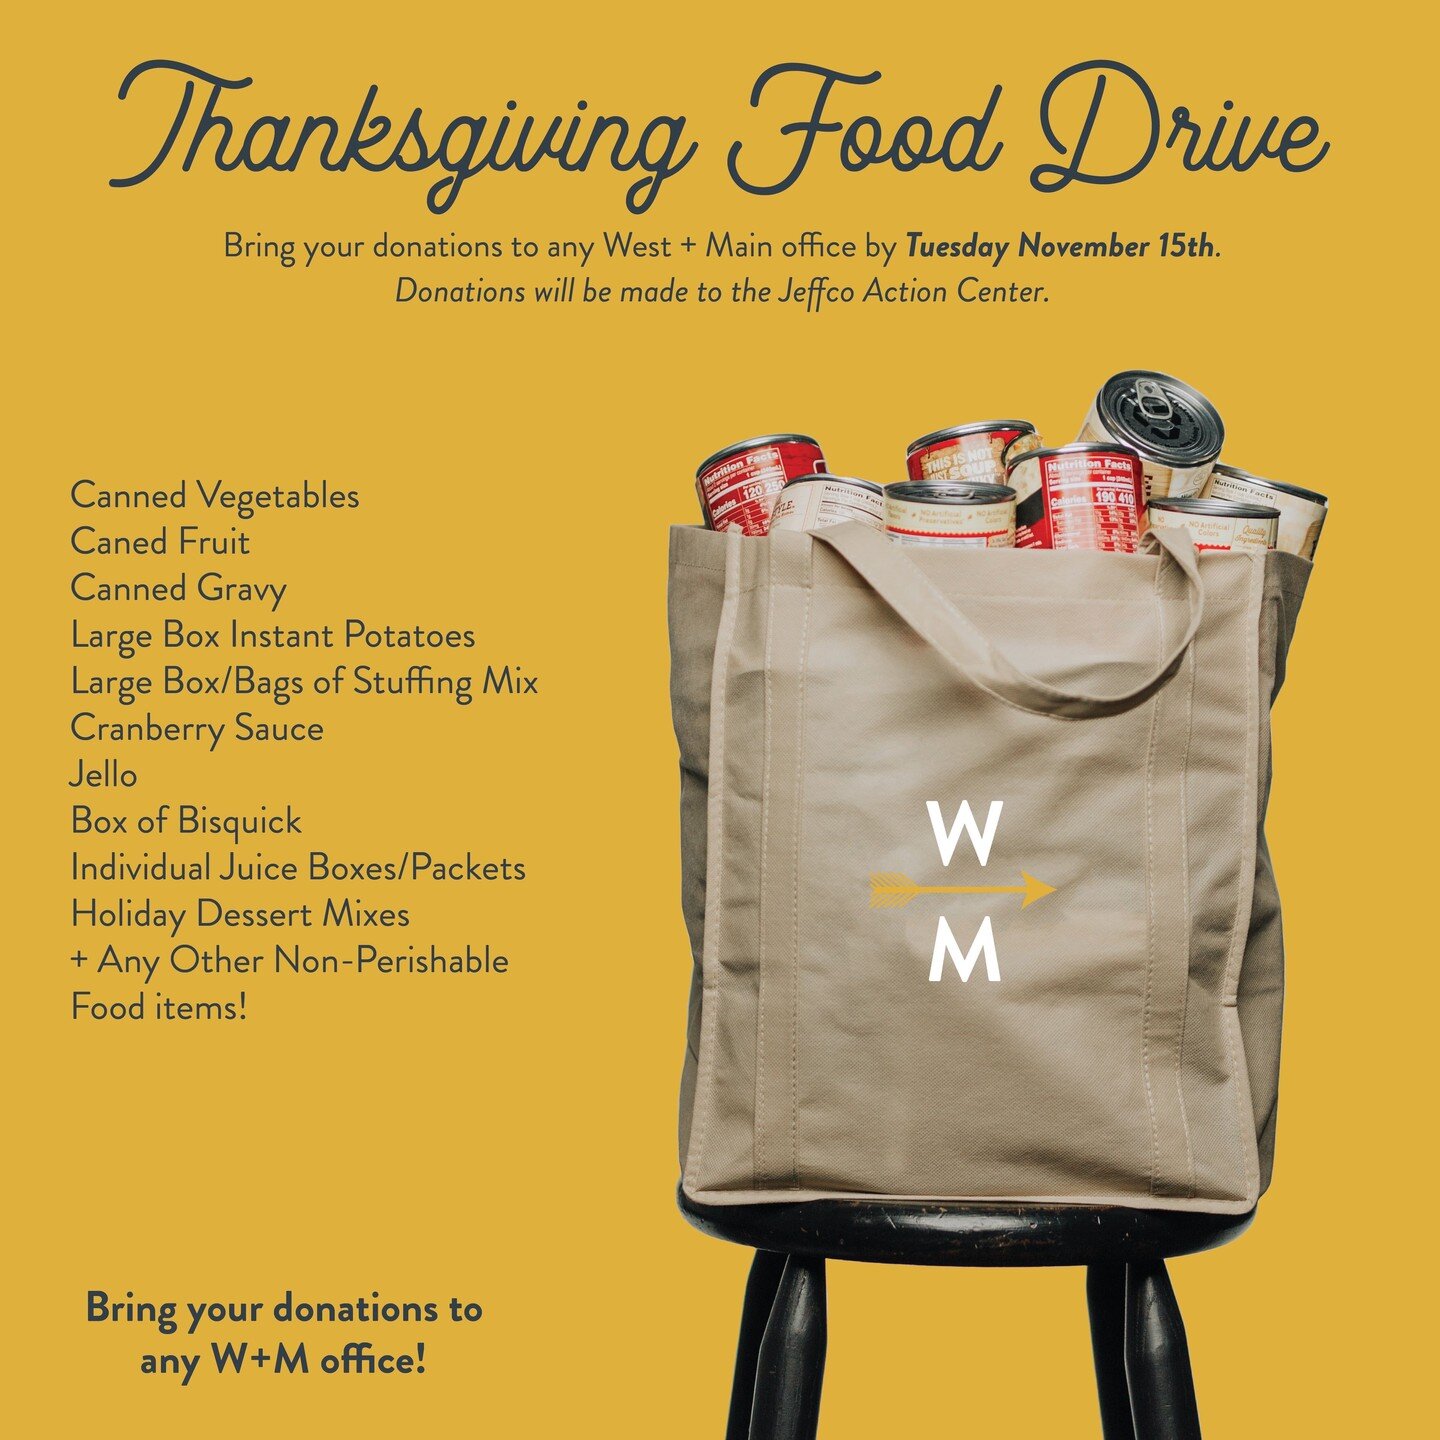 West + Main has organized a Thanksgiving Food Drive - if you have donations I will come pick them up from you! We are donating to the Jeffco Action Center - and accepting donations through the 15th of November!